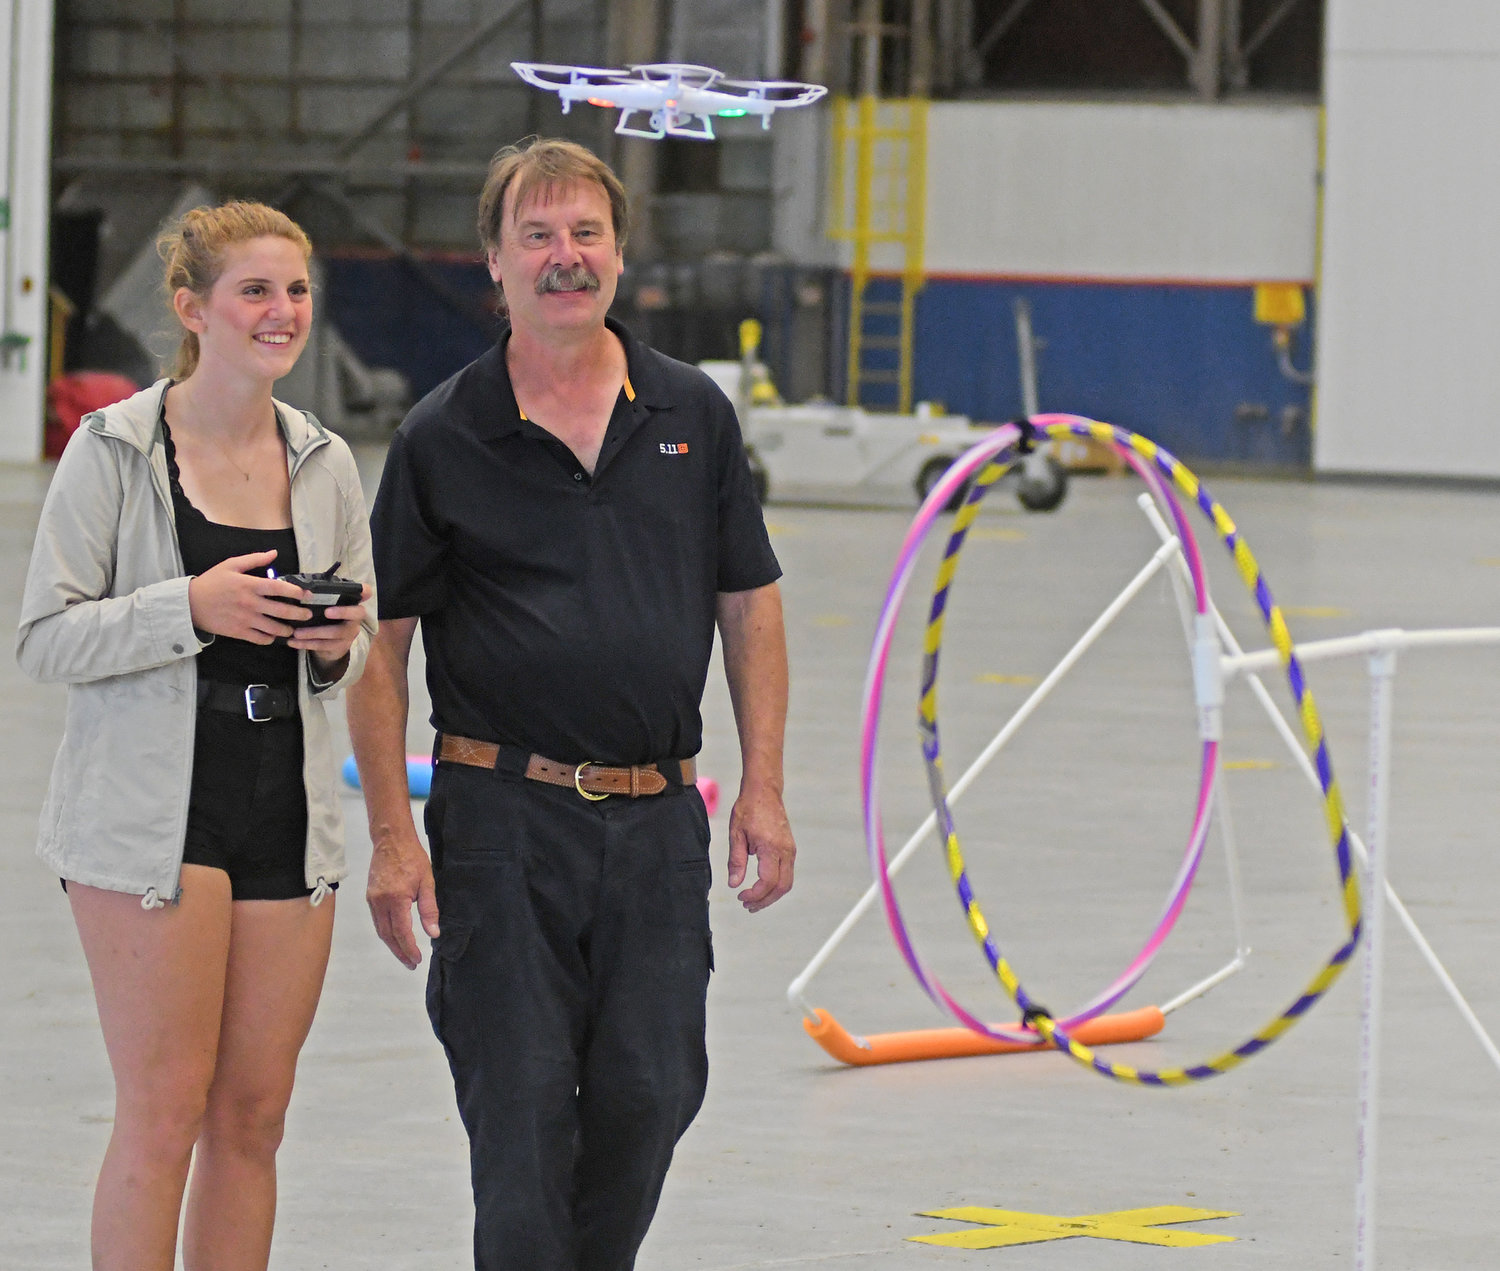 ON THE MOVE — Paige Novak, of Vernon-Verona-Sherrill High School, flies her drone through an obstacle course in Building 100 at Griffiss Business Park as instructor Bill Judycki looks on.